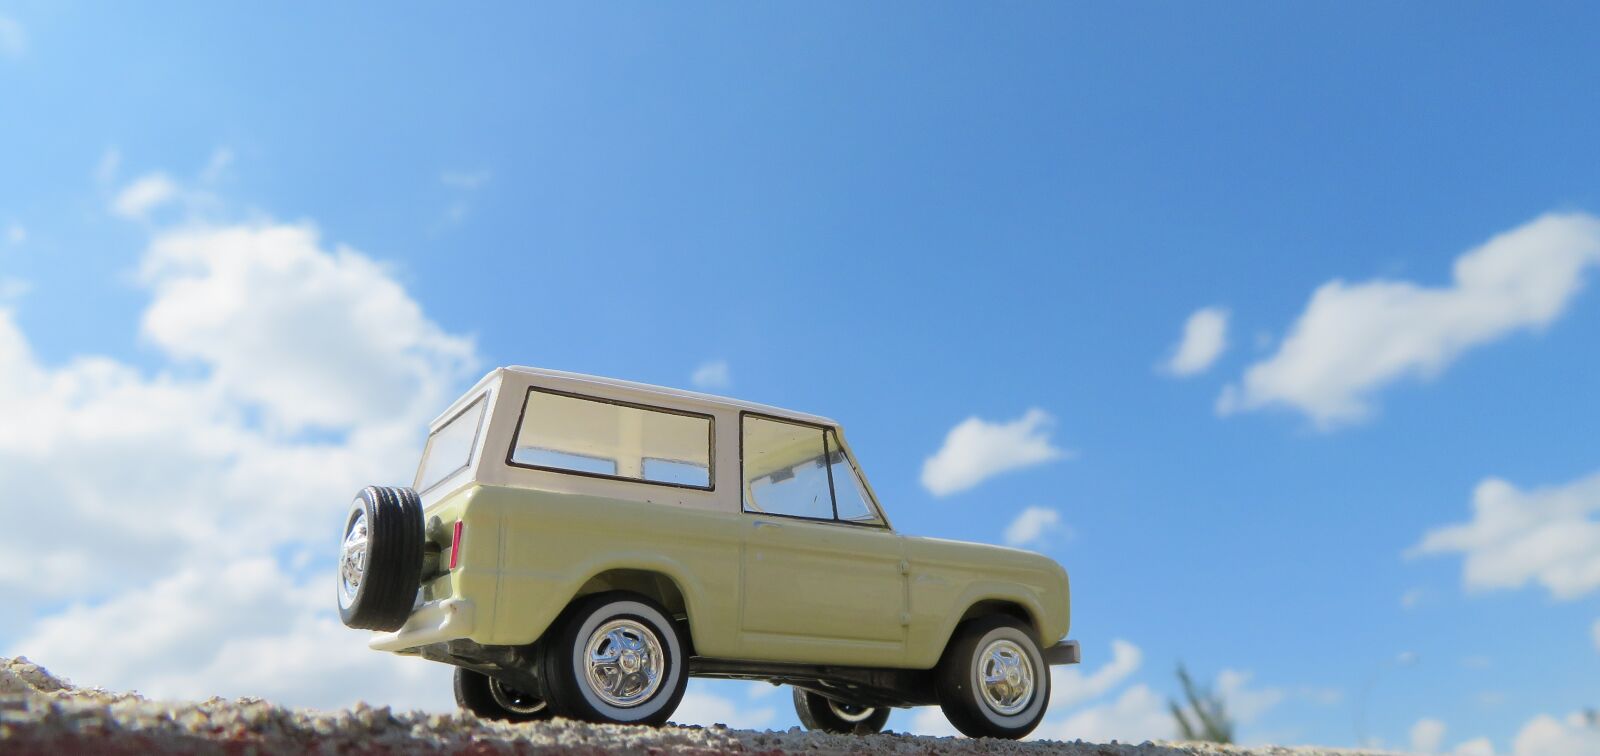 4.3 - 172.0 mm sample photo. Ford bronco, car, sky photography